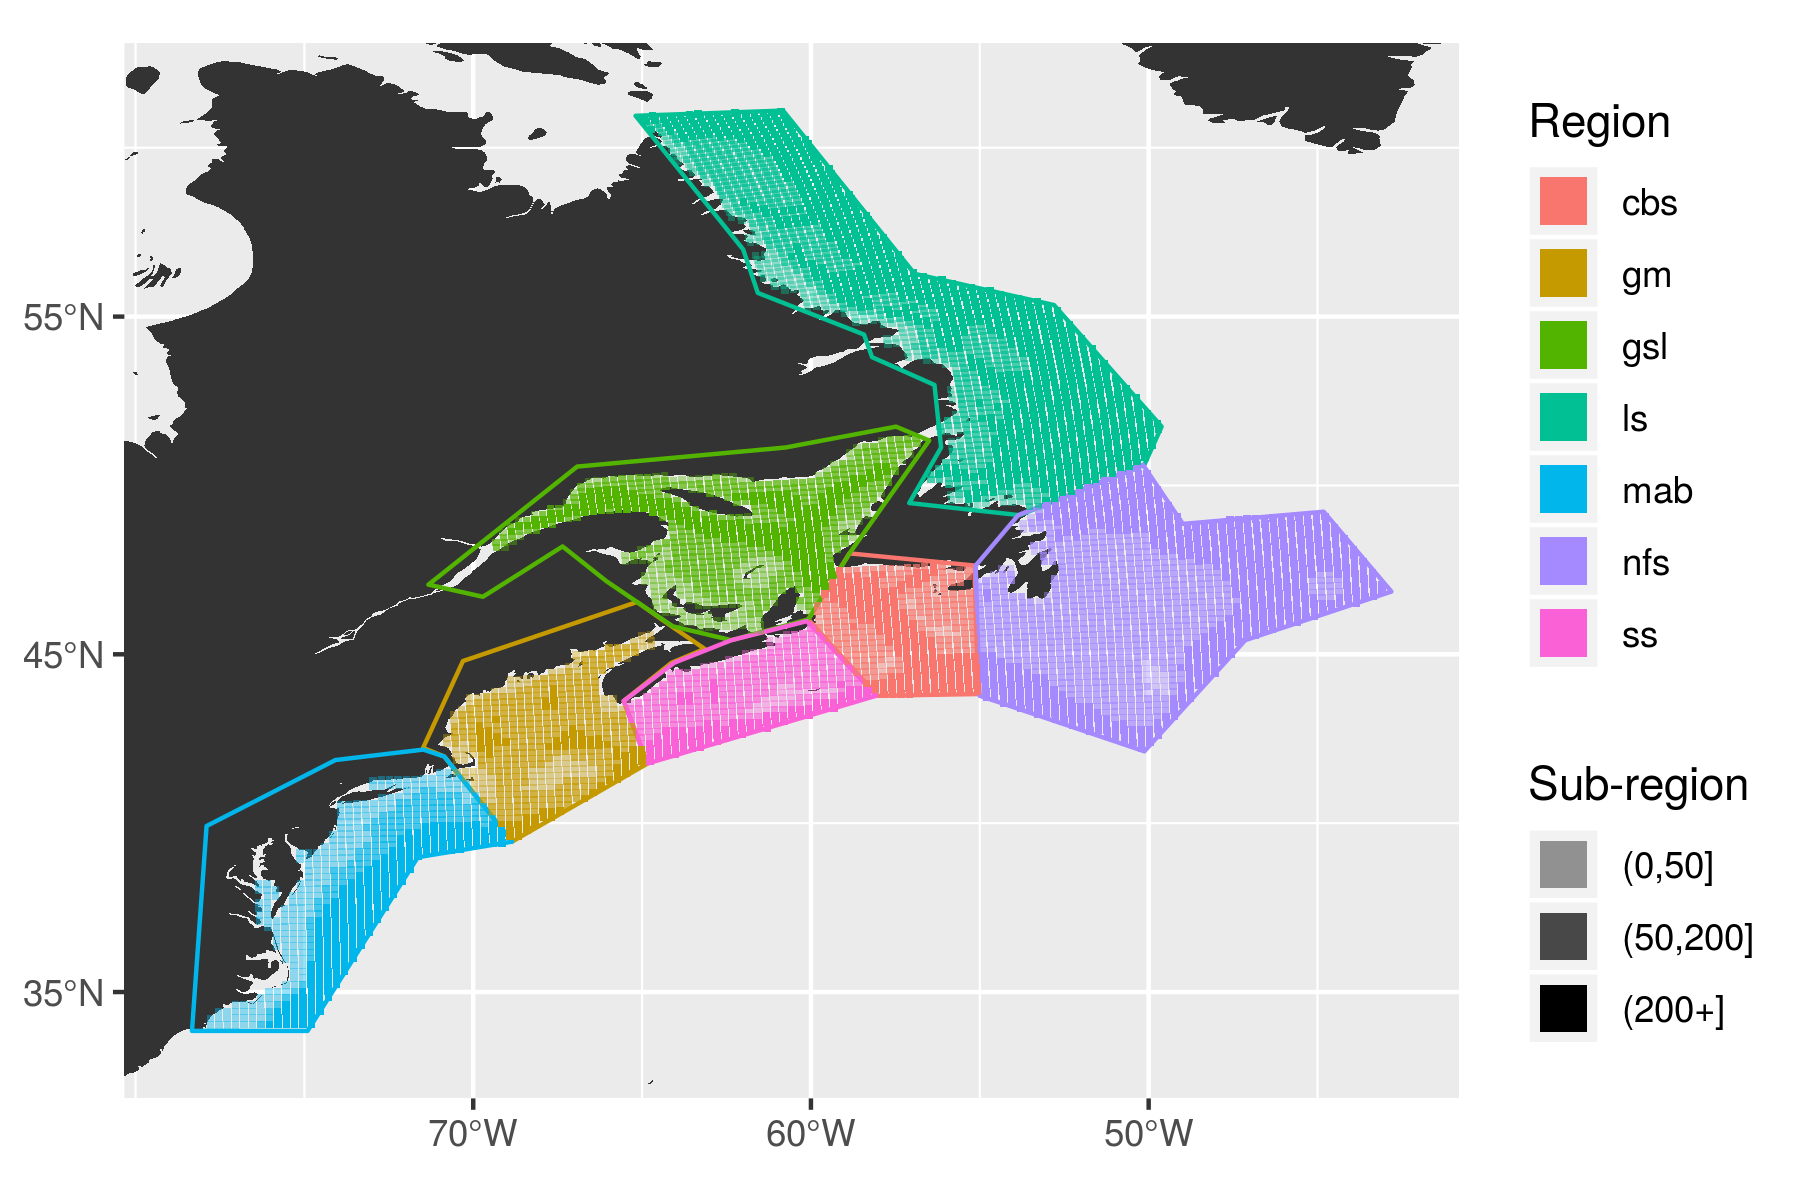 The regions of the coast were devided up by their temperature and salinity regimes based on work by @Richaud2016. The region abbreviations are: gm = Gulf of Maine, gls = Gulf of St. Lawrence, ls = Labrador Shelf, mab = Mid-Atlantic Bight, nfs = Newfoundland Shelf, ss = Scotian Shelf. The regions were furthered divided into sub-regions based on their depth.